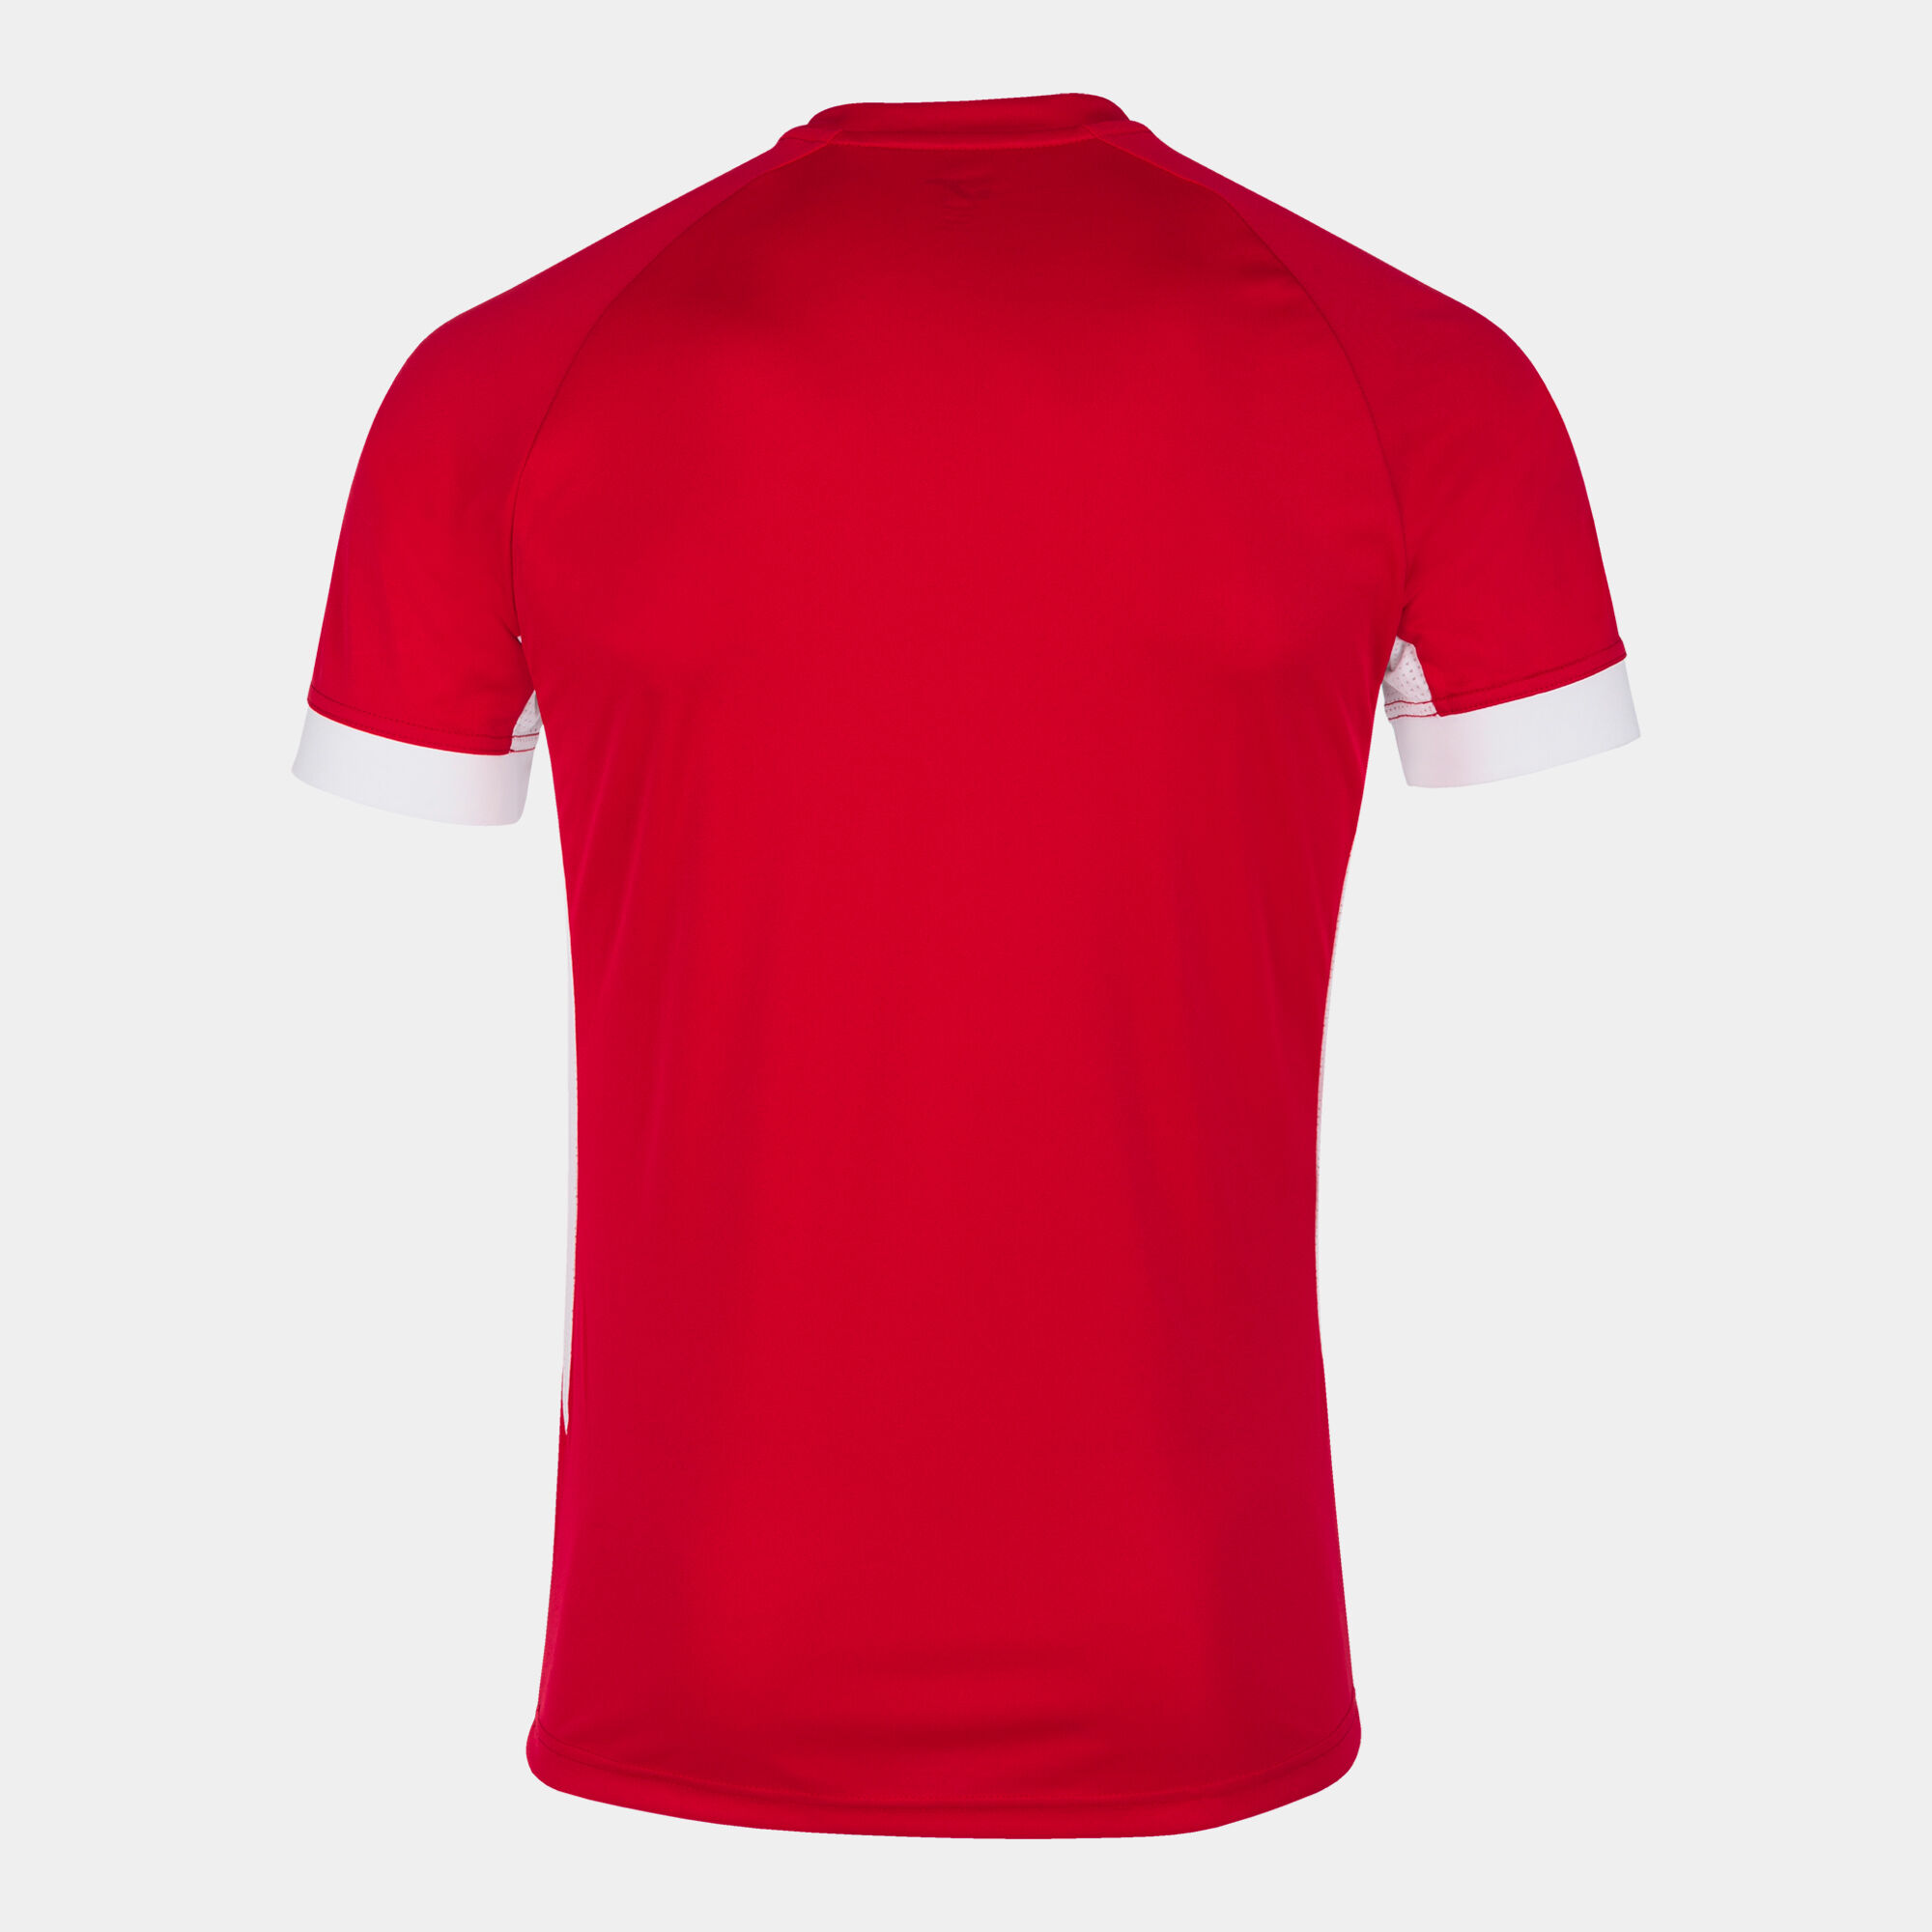 MAILLOT MANCHES COURTES HOMME SUPERNOVA II ROUGE BLANC